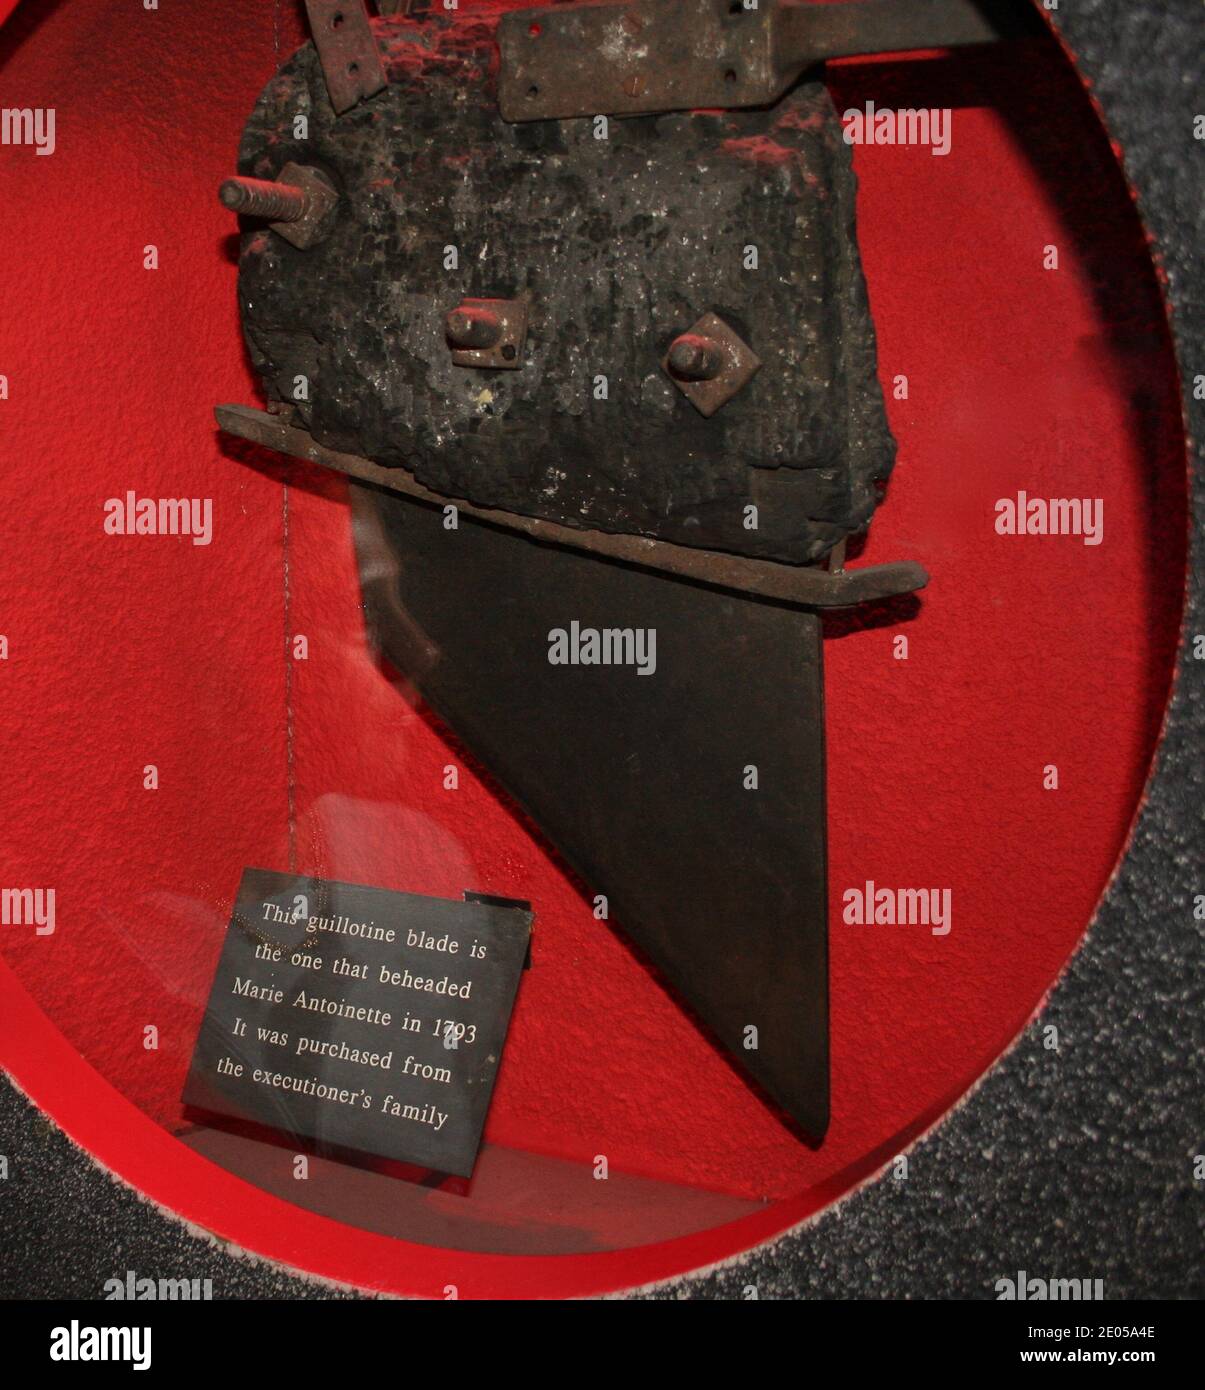 The actual guillotine blade used to behead Marie Antoinette in France in 1793 on display Chamber of Horrors at Madame Tussauds London England UK Stock Photo